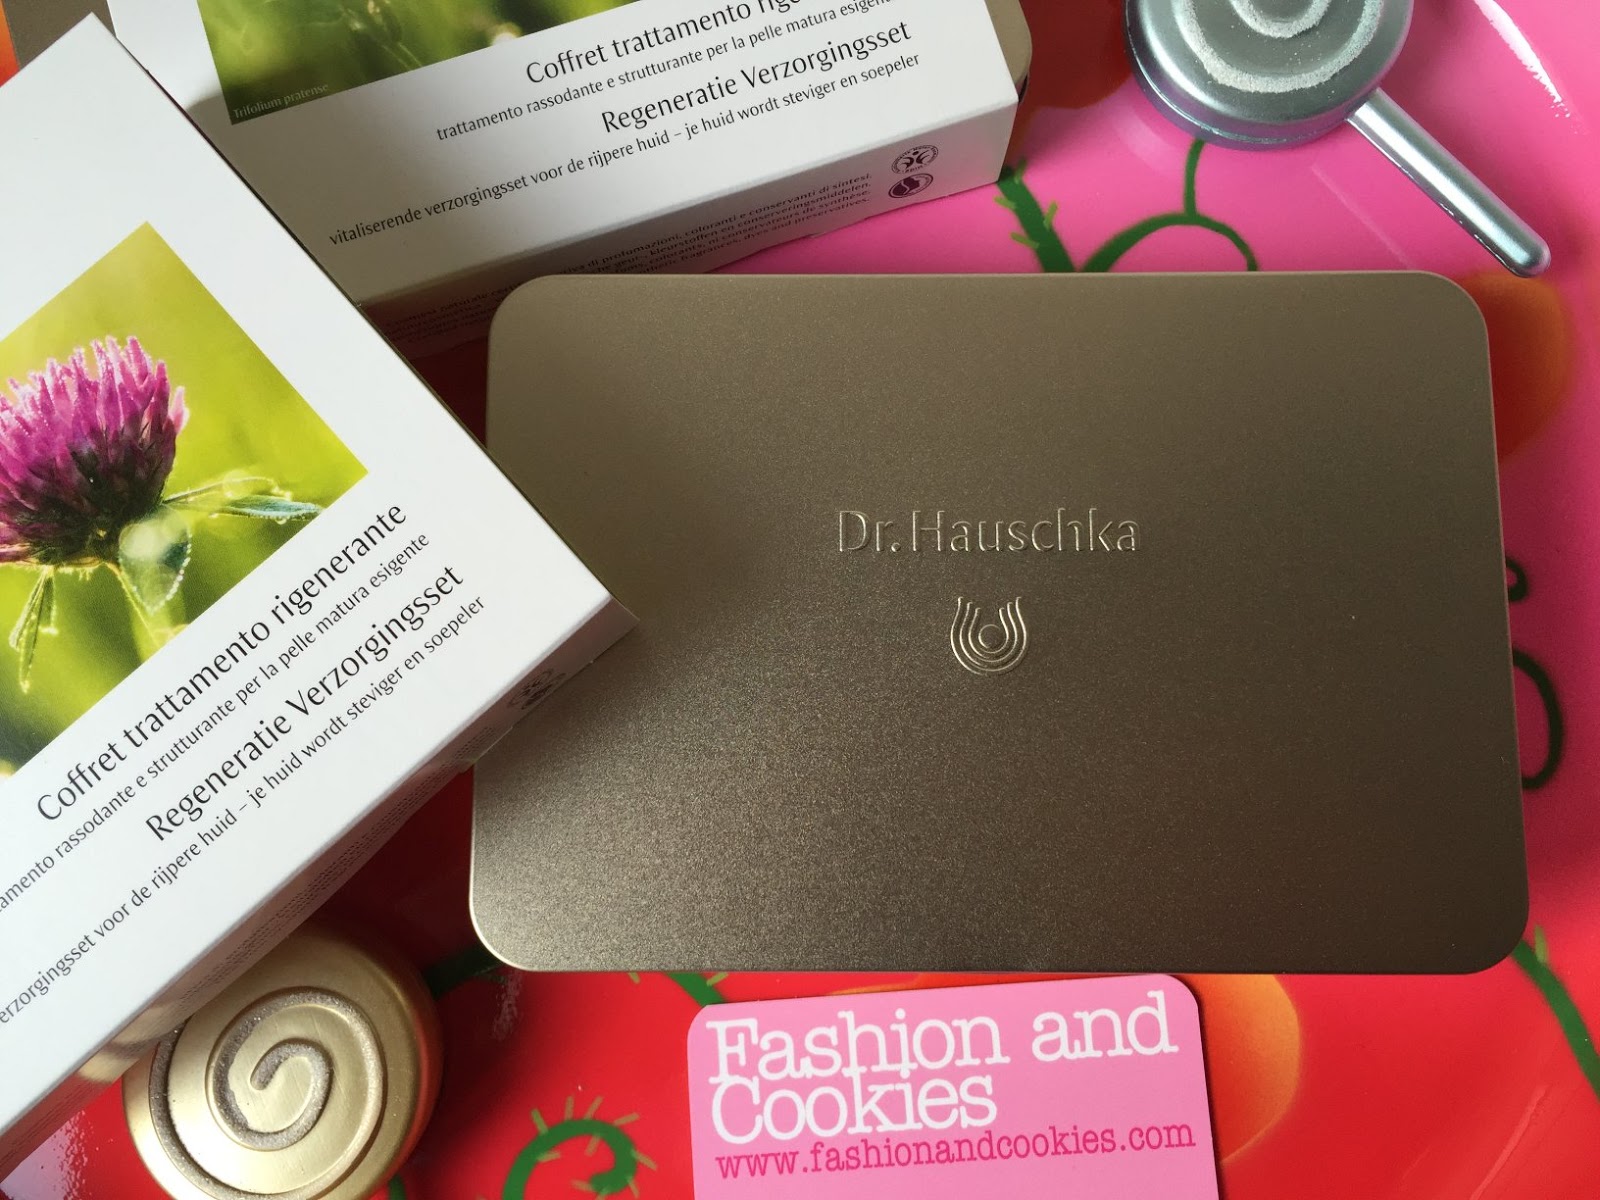 Dr. Hauschka Regenerating Skin Care Kit, Coffret Trattamento Rigenerante on Fashion and Cookies beauty blog, beauty blogger from Italy